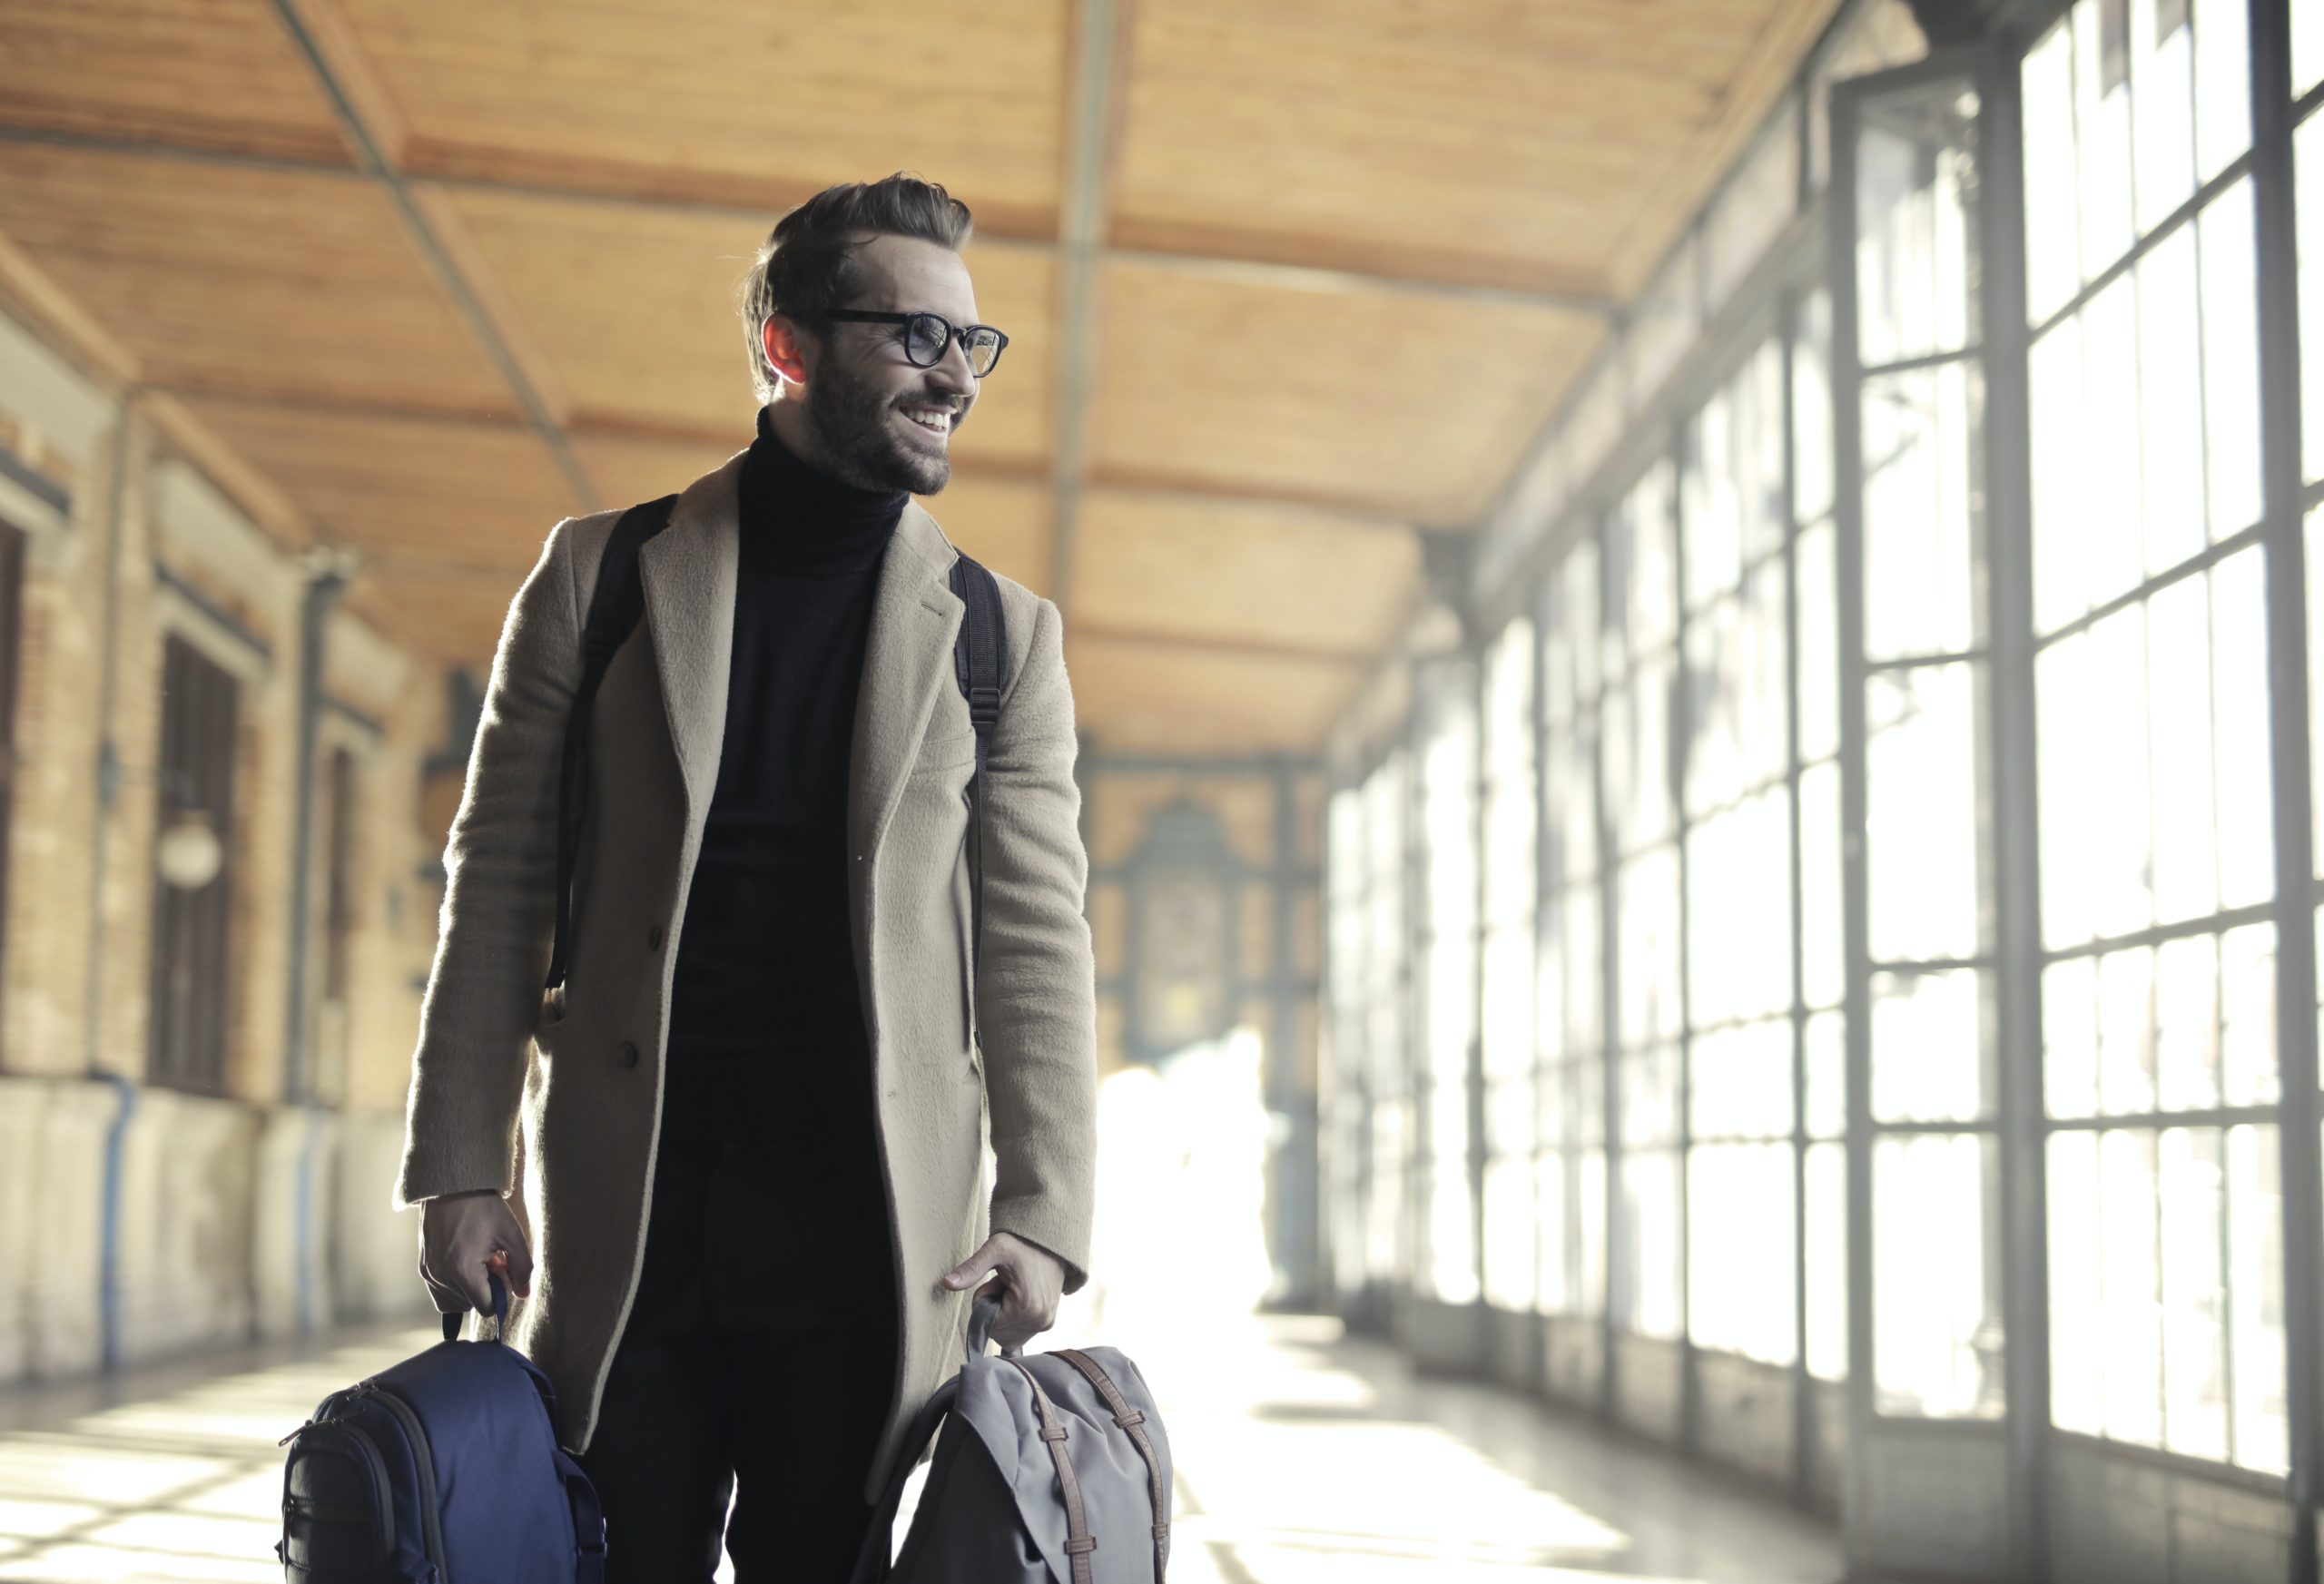 Question Of The Week: Can I Use A Free Checked Bag Credit Card Perk?